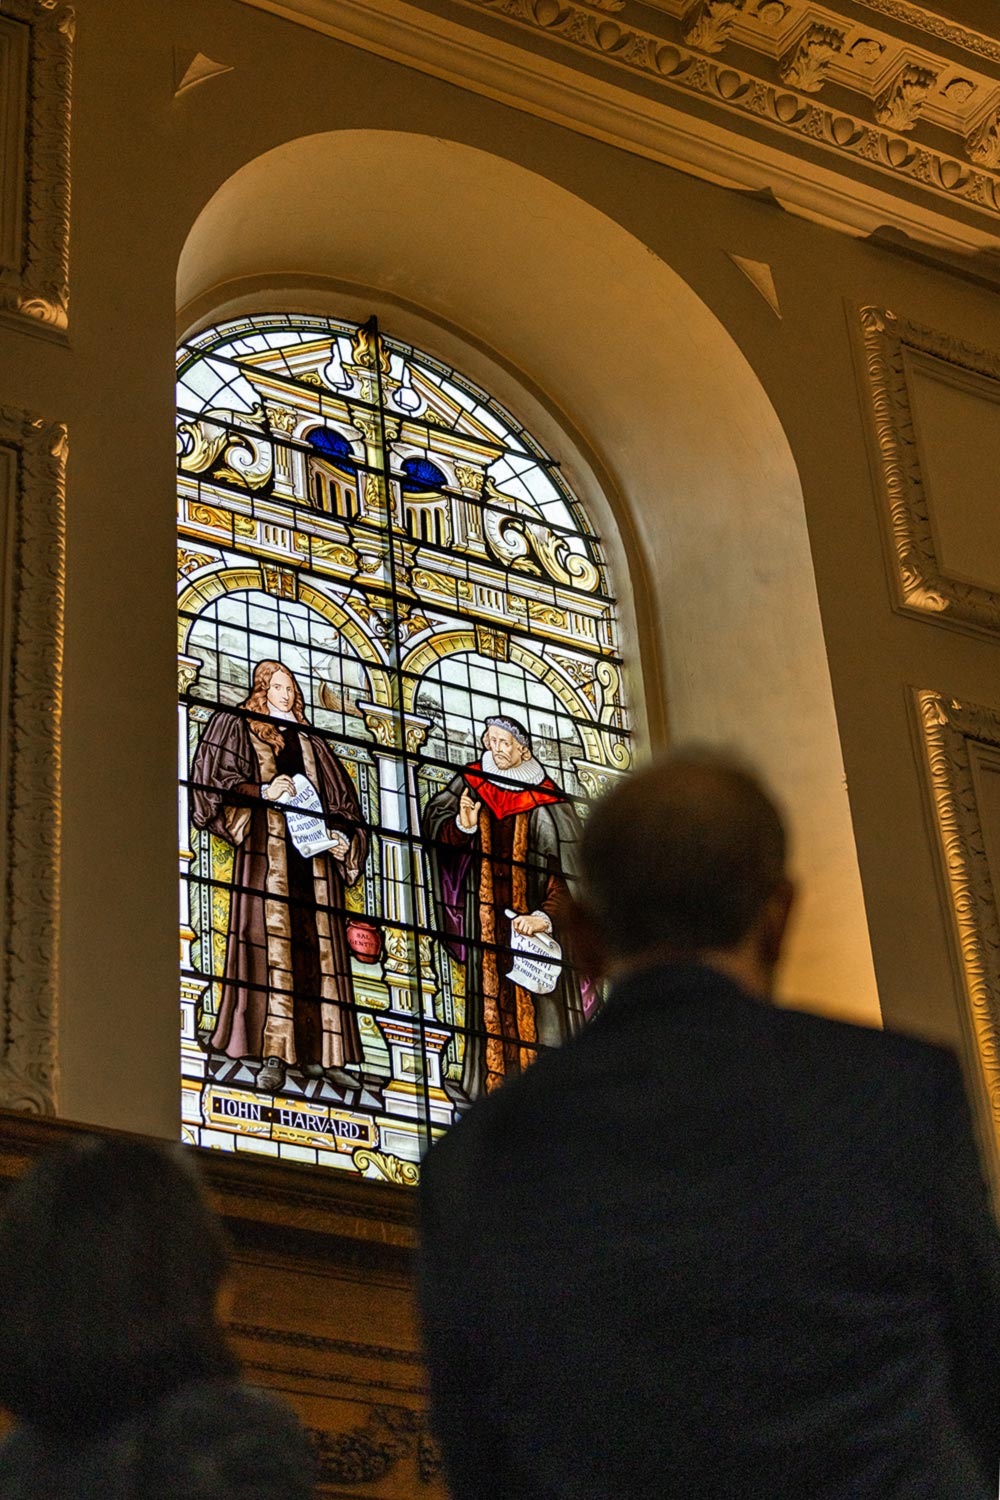 A man looks up at a stained glass window depicting John Harvard and another scholar.